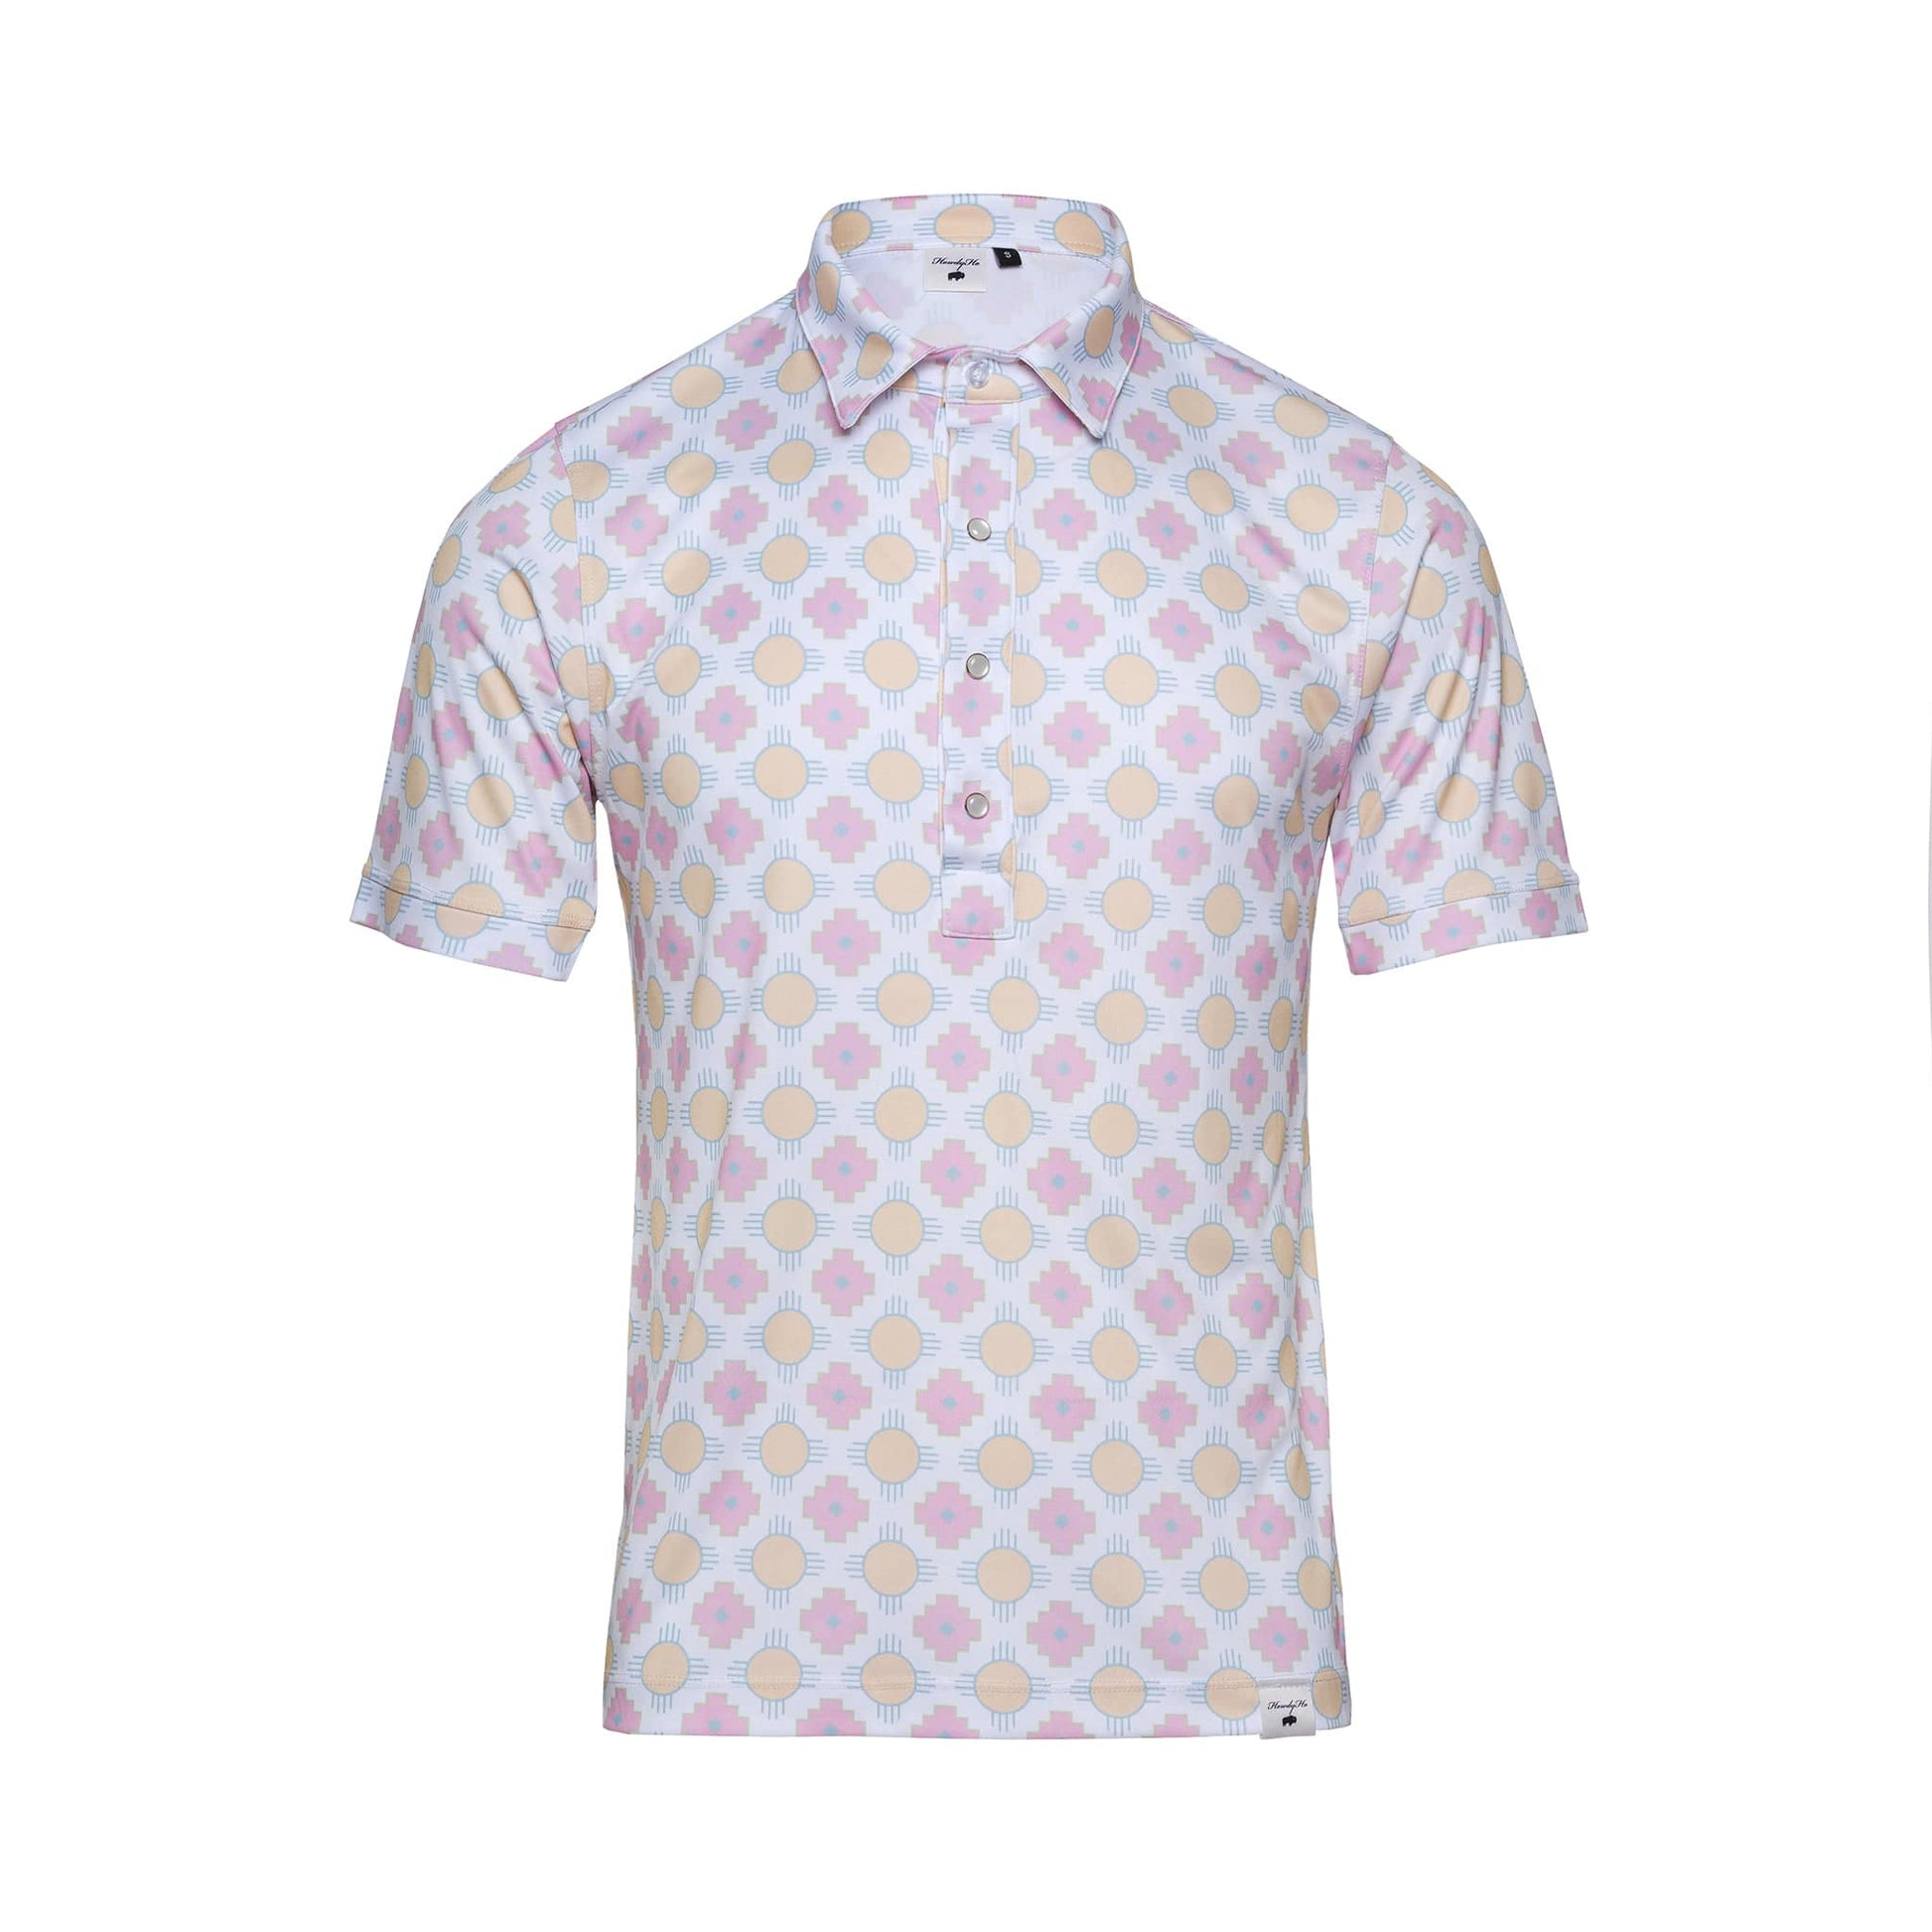 A HowdyHo Sunset Crossroads shirt is displayed against a white background, featuring a light-hearted pattern of pink and yellow sunbursts on a crisp white fabric. The shirt's short sleeves, classic collar, and front button closure make it a playful yet elegant choice for warm weather, embodying the laid-back spirit of a sunset in its design.